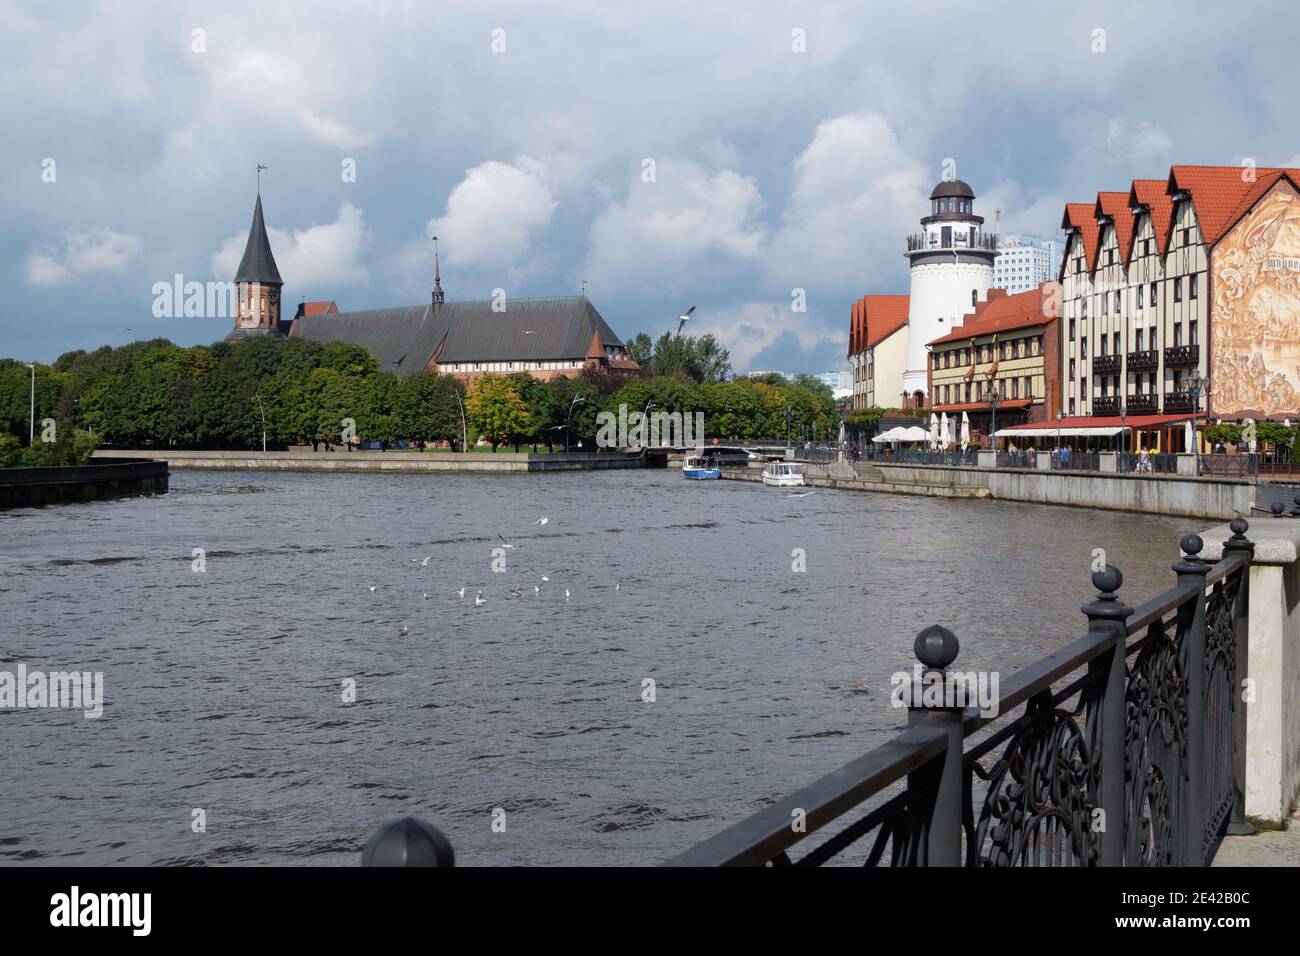 KALININGRAD, RUSSIA - SEP 19, 2017: Ethnographic and trade center, embankment of the Fishing Village. Stock Photo